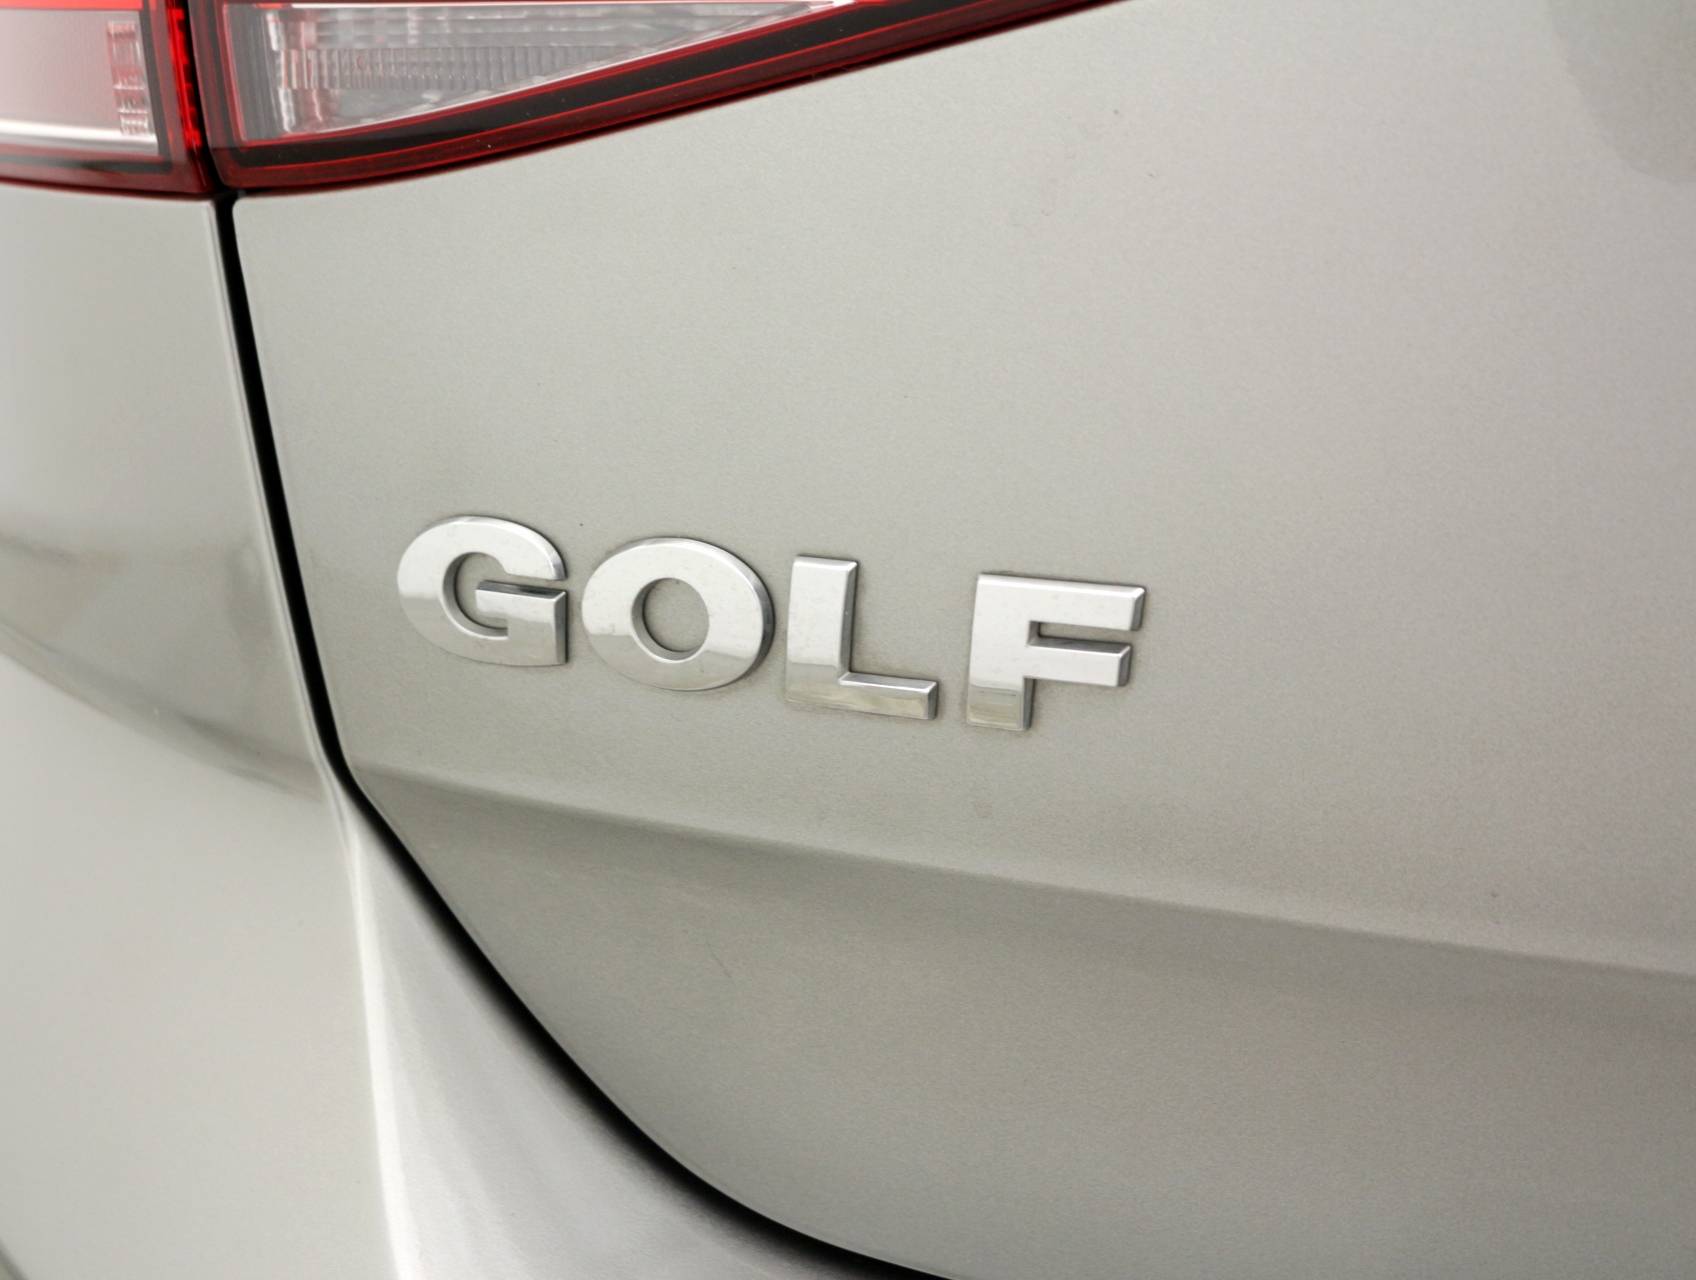 Florida Fine Cars - Used VOLKSWAGEN GOLF 2016 HOLLYWOOD S